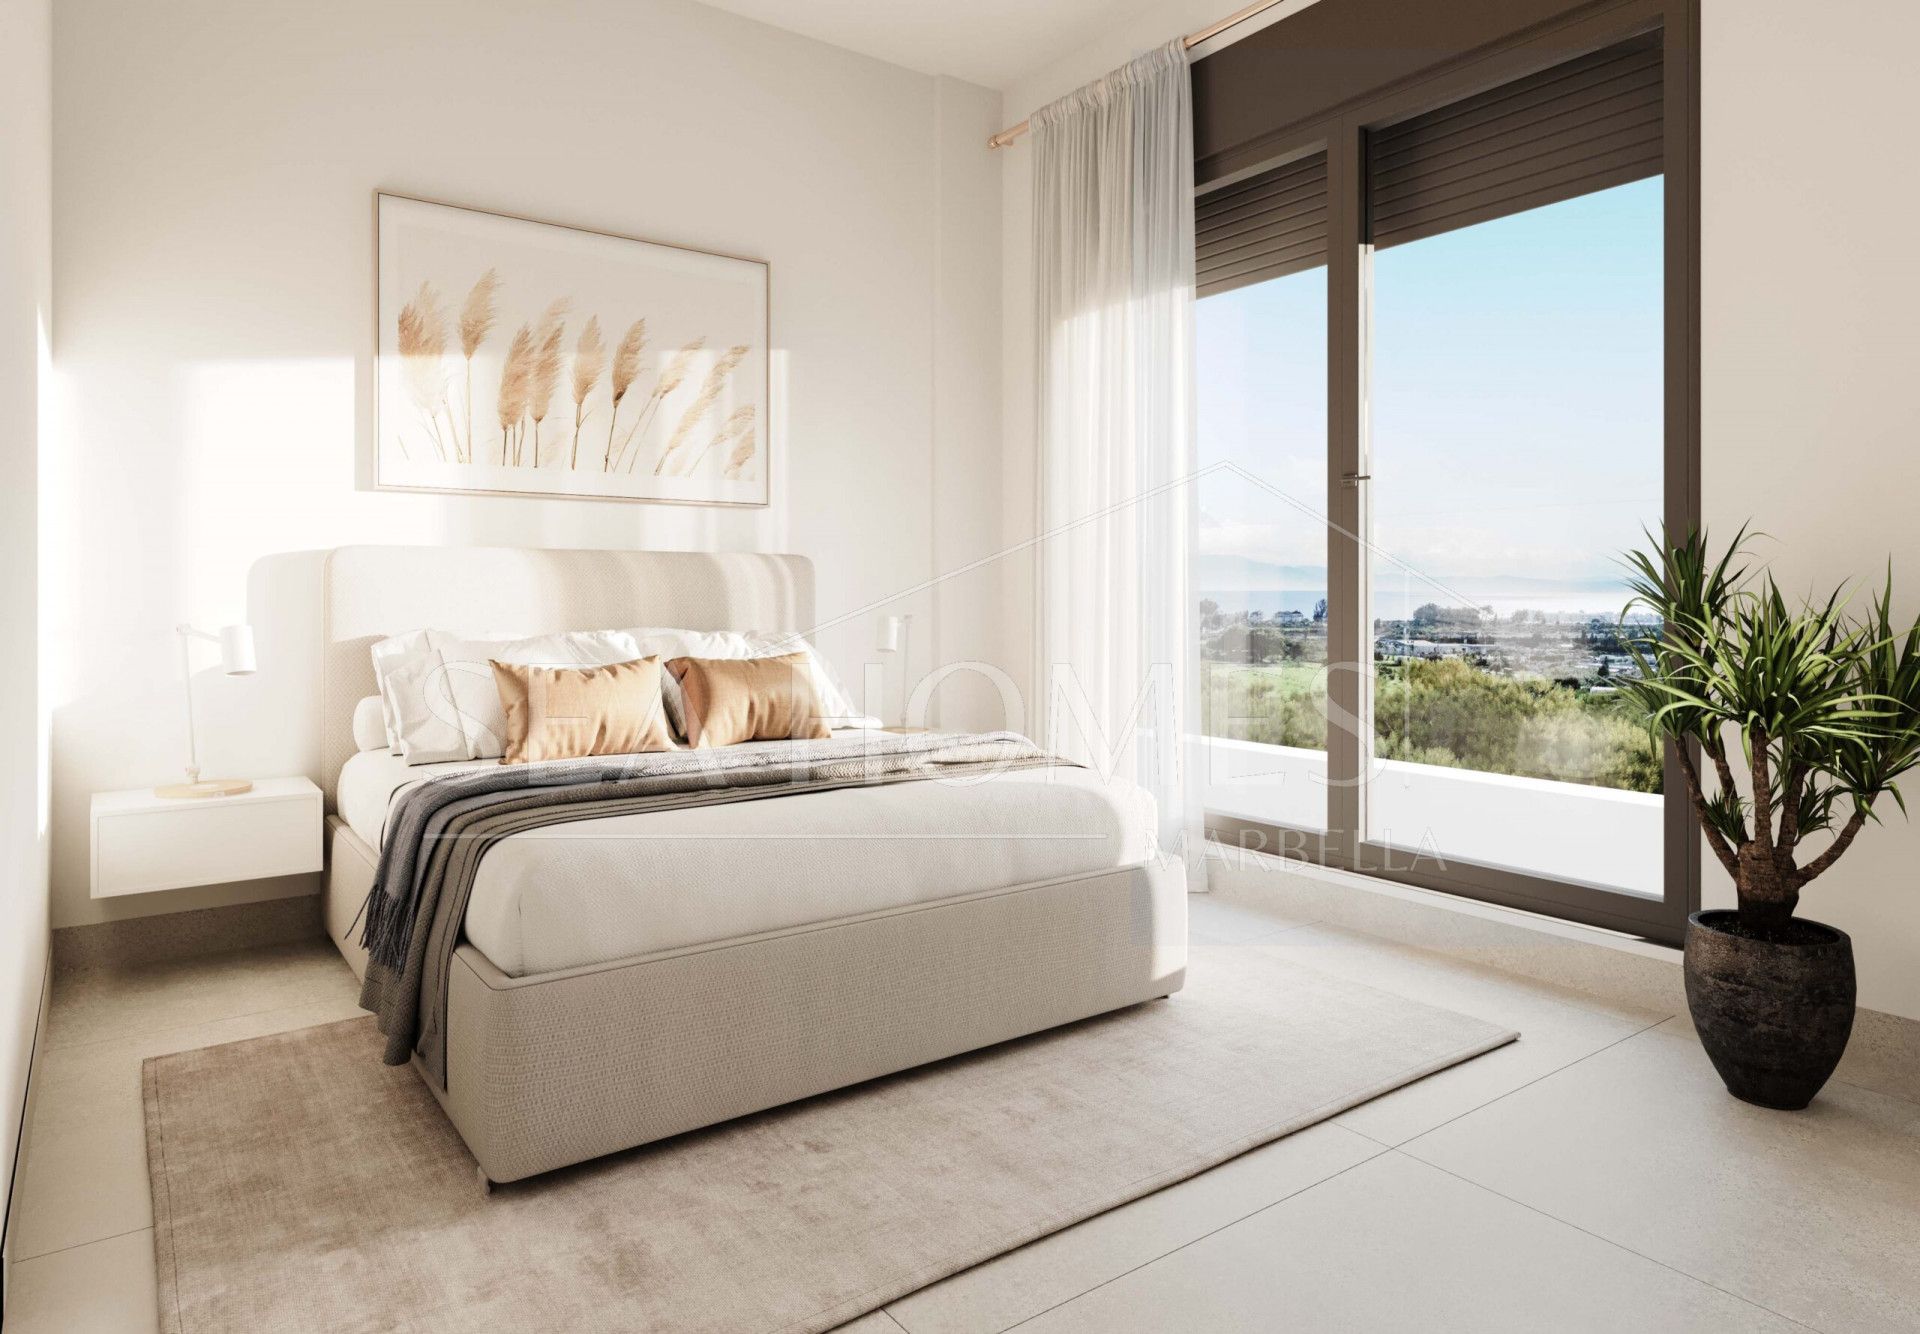 Symphony Suites, modern and elegant groundfloors and penthouses with sea views in the New Golden Mile